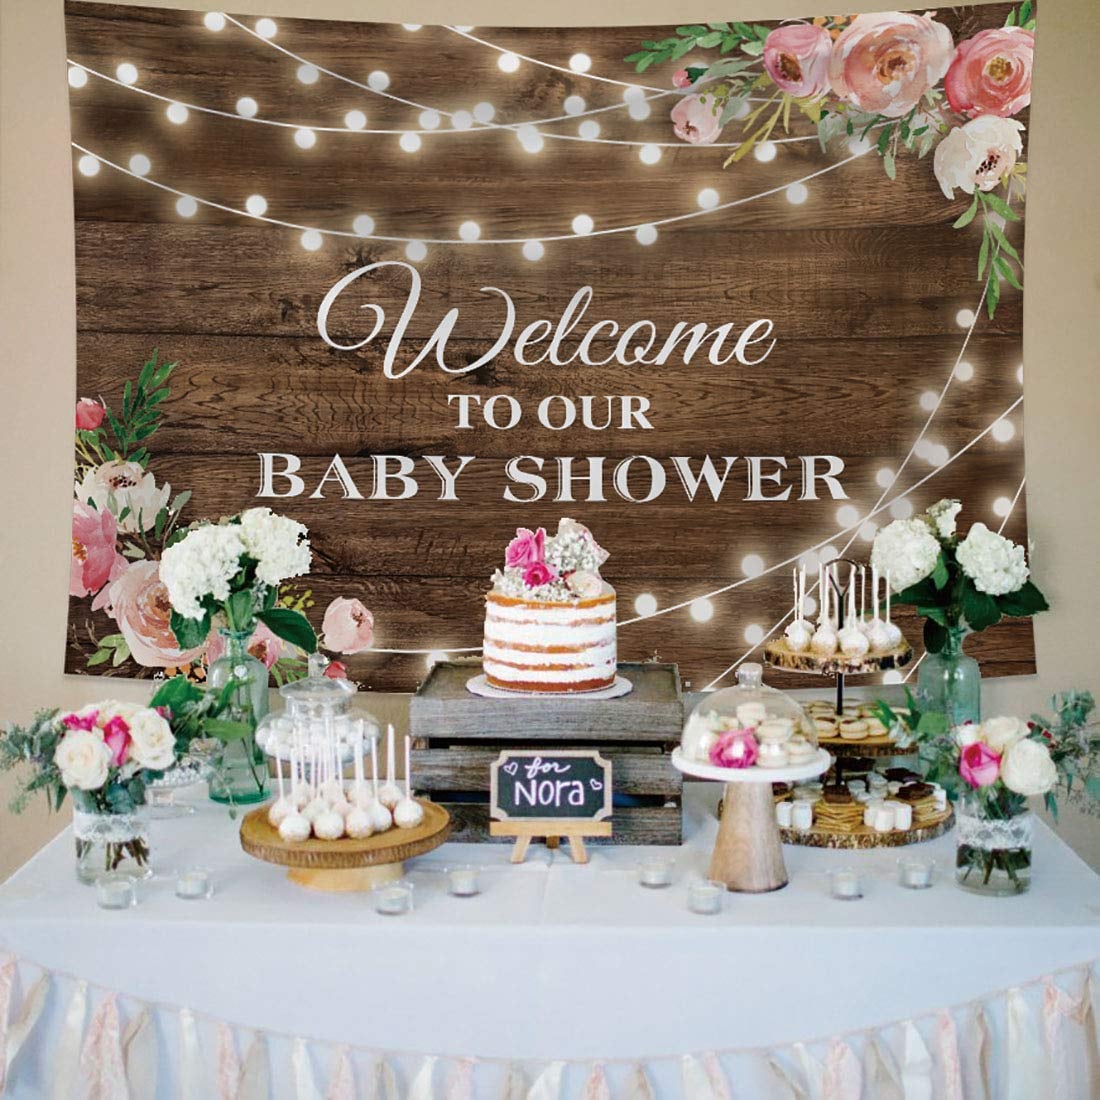 Yeele Rustic Baby Shower Photography Backdrop 7x5ft Vintage Brown Wood with Milk Bottles Background Kindergarten Activity Wild Baby Shower Party Table Decor Photo Booth Digital Wallpaper 